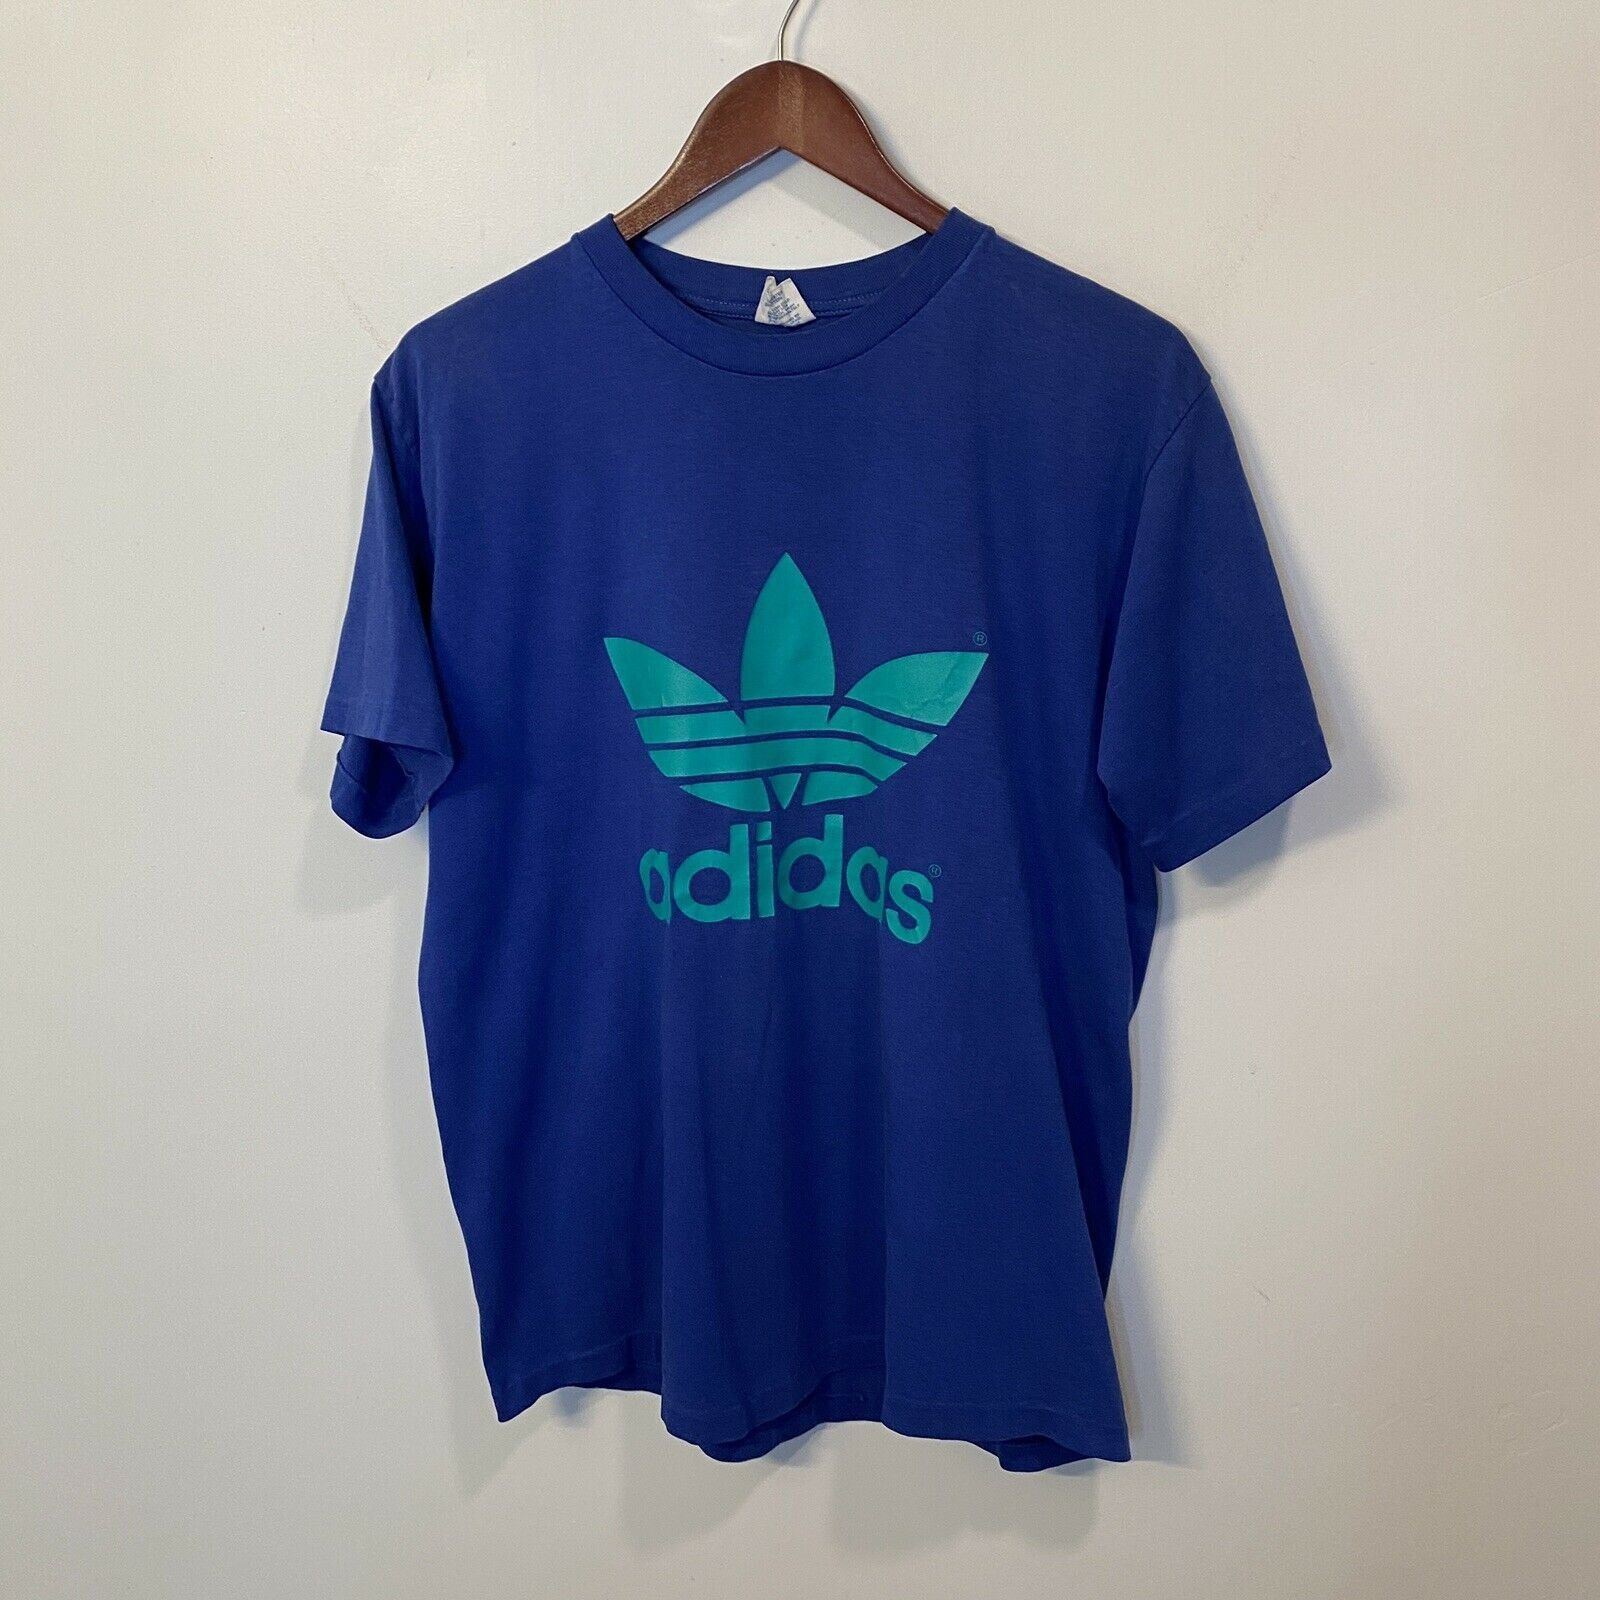 Adidas Vintage Adidas T Shirt 80s Double Sided Trefoil Spellout | Grailed